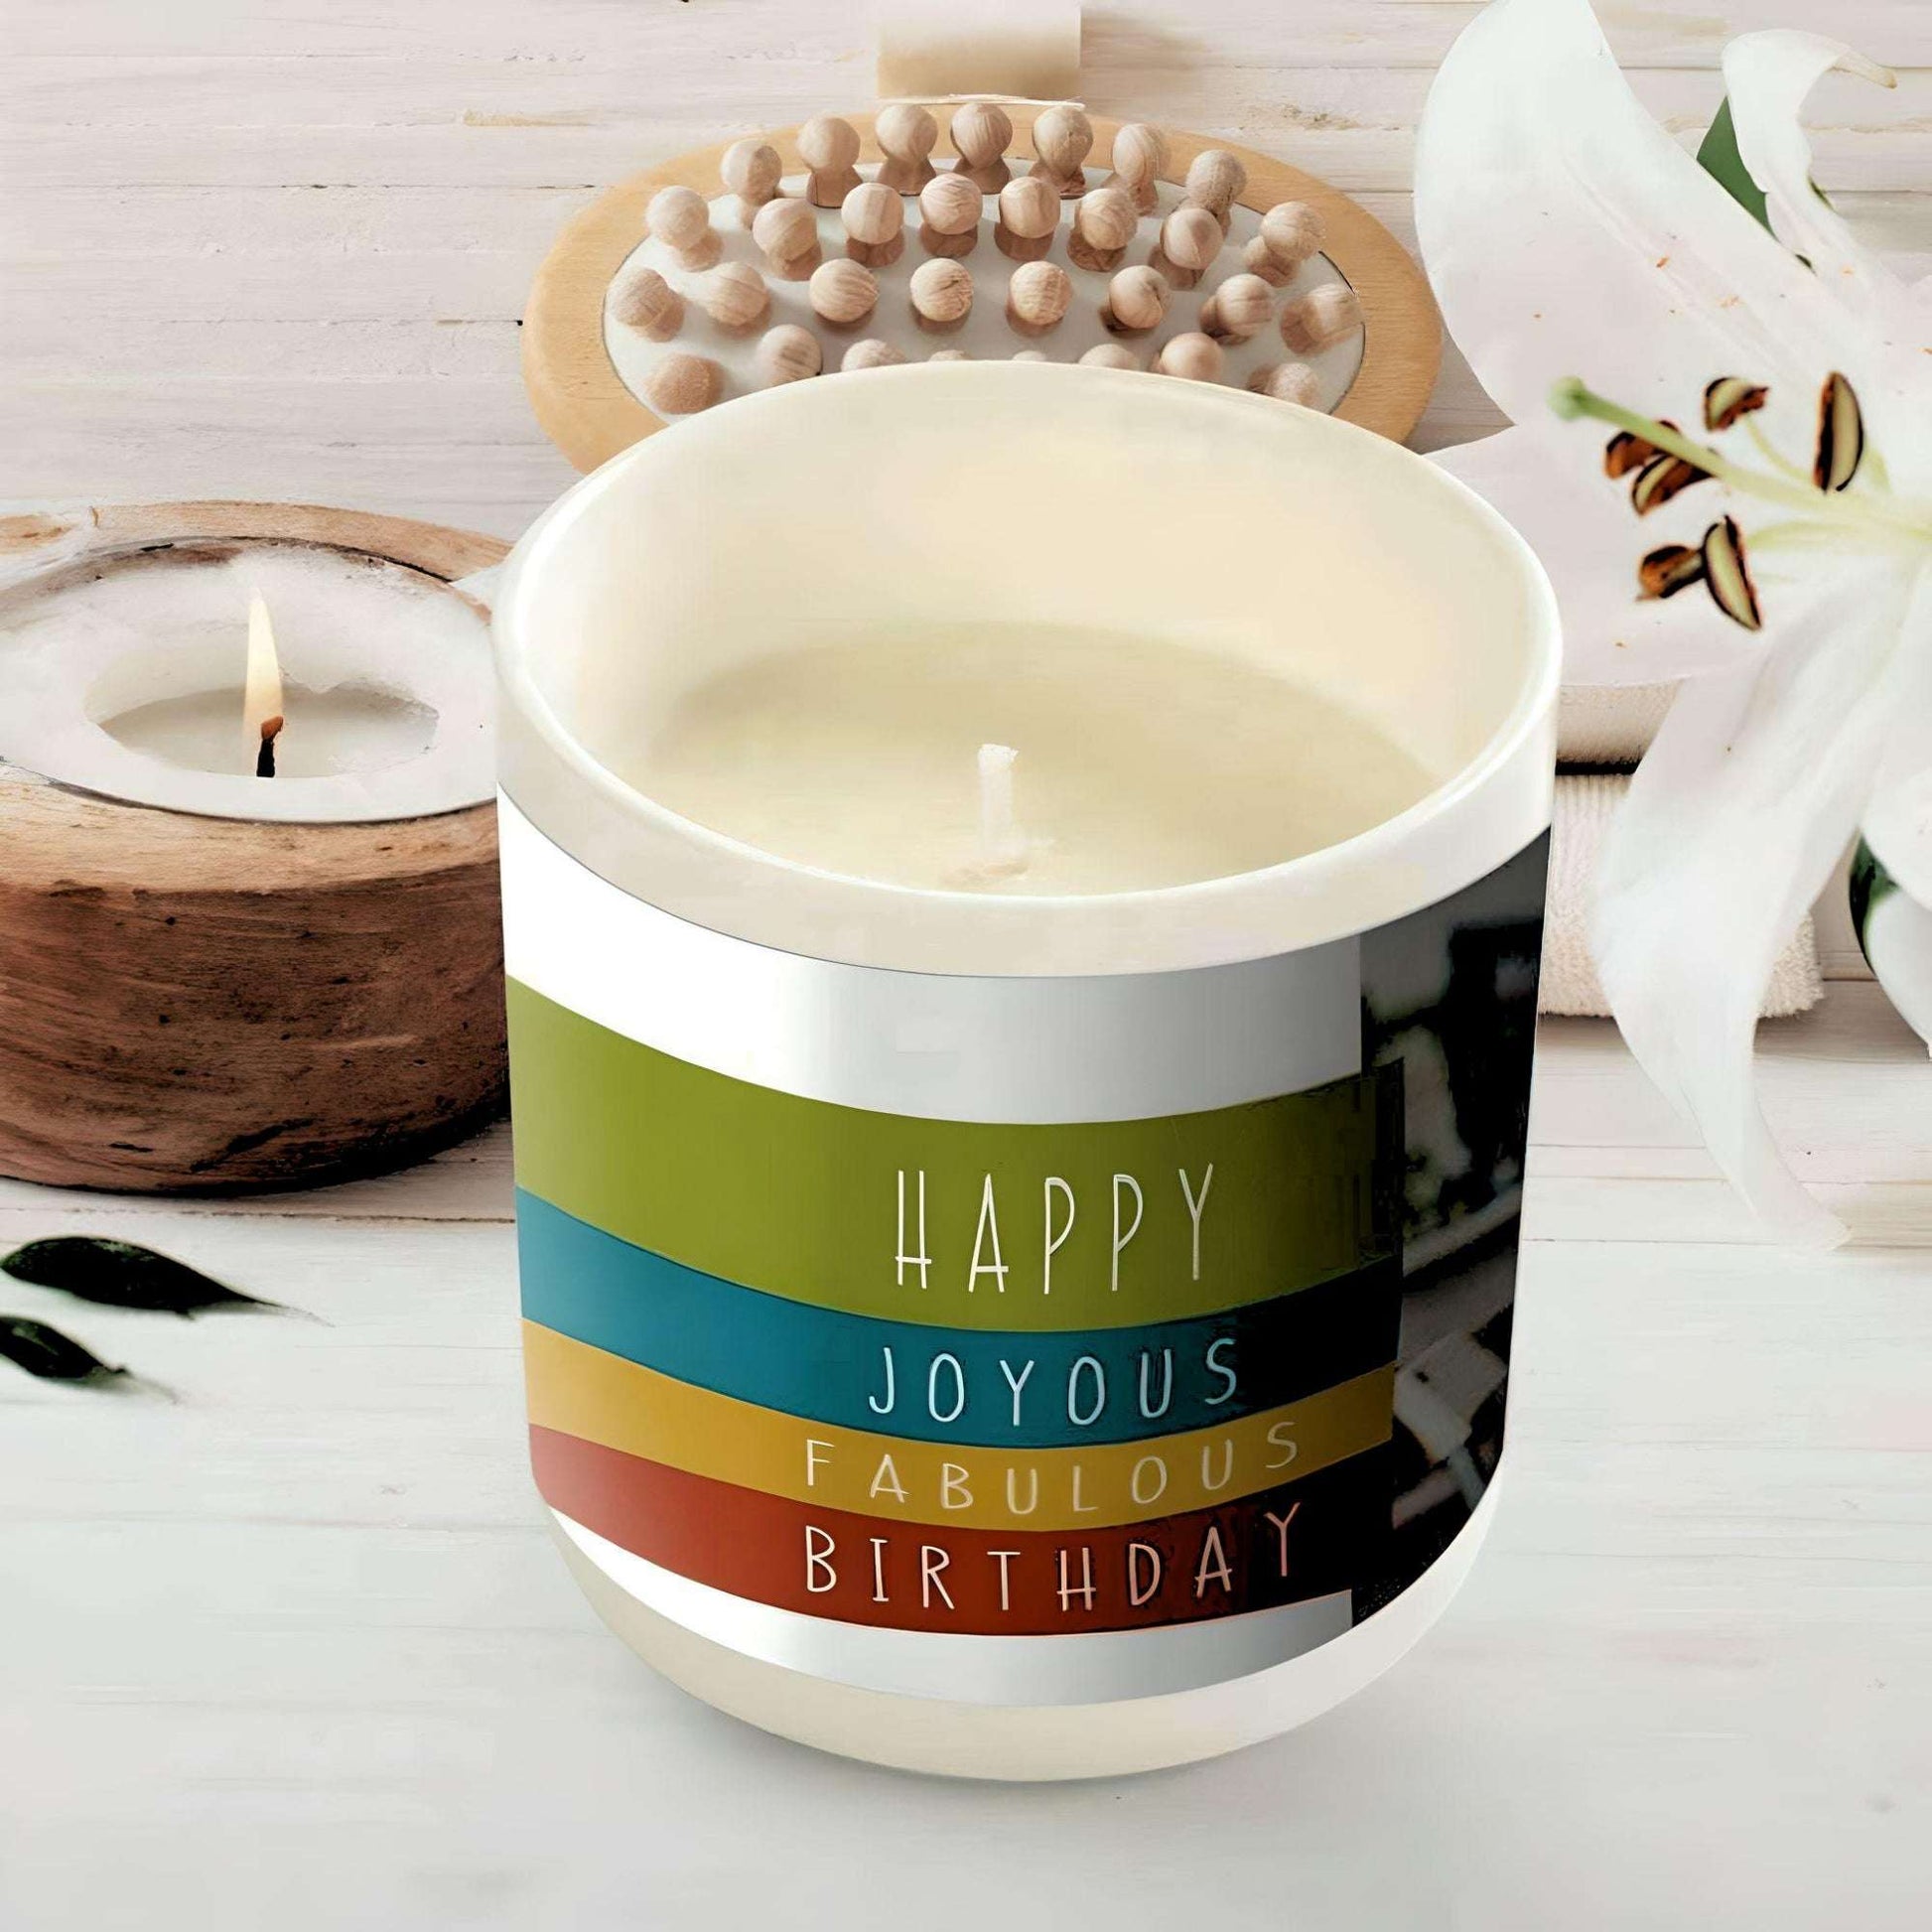 Personalized Photo Candle - Gifting By Julia M